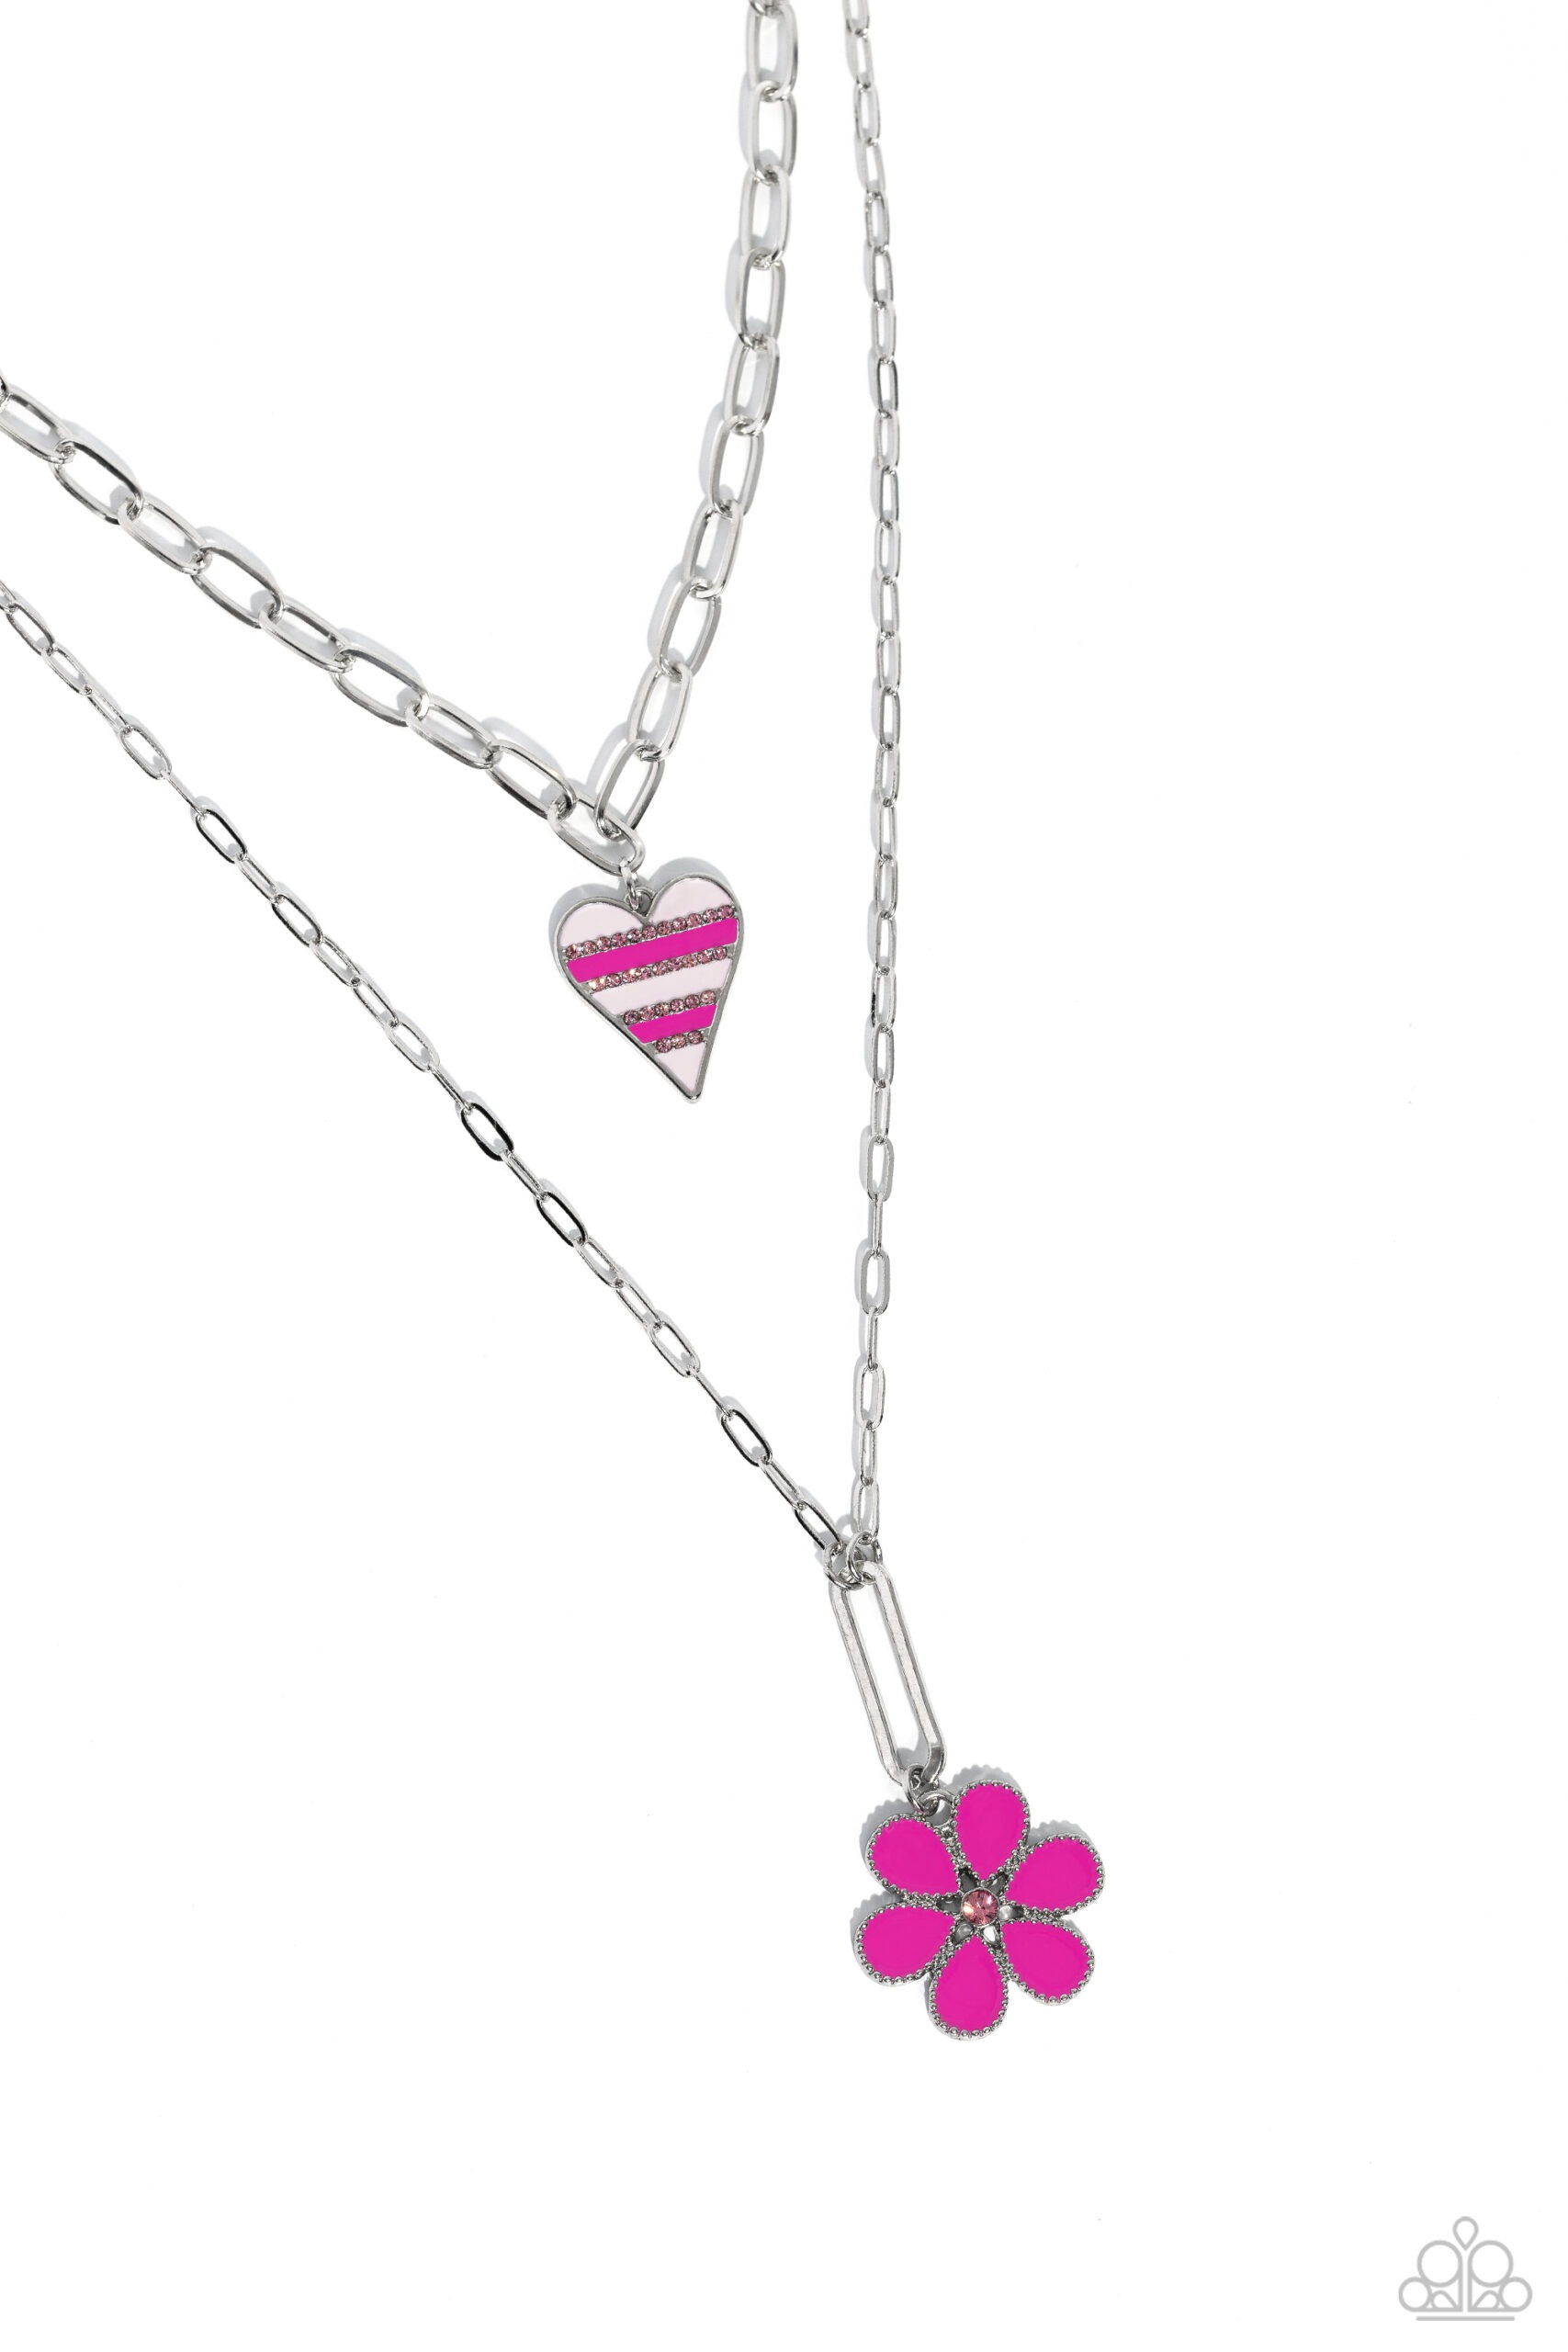 Necklace - Childhood Charms - Pink